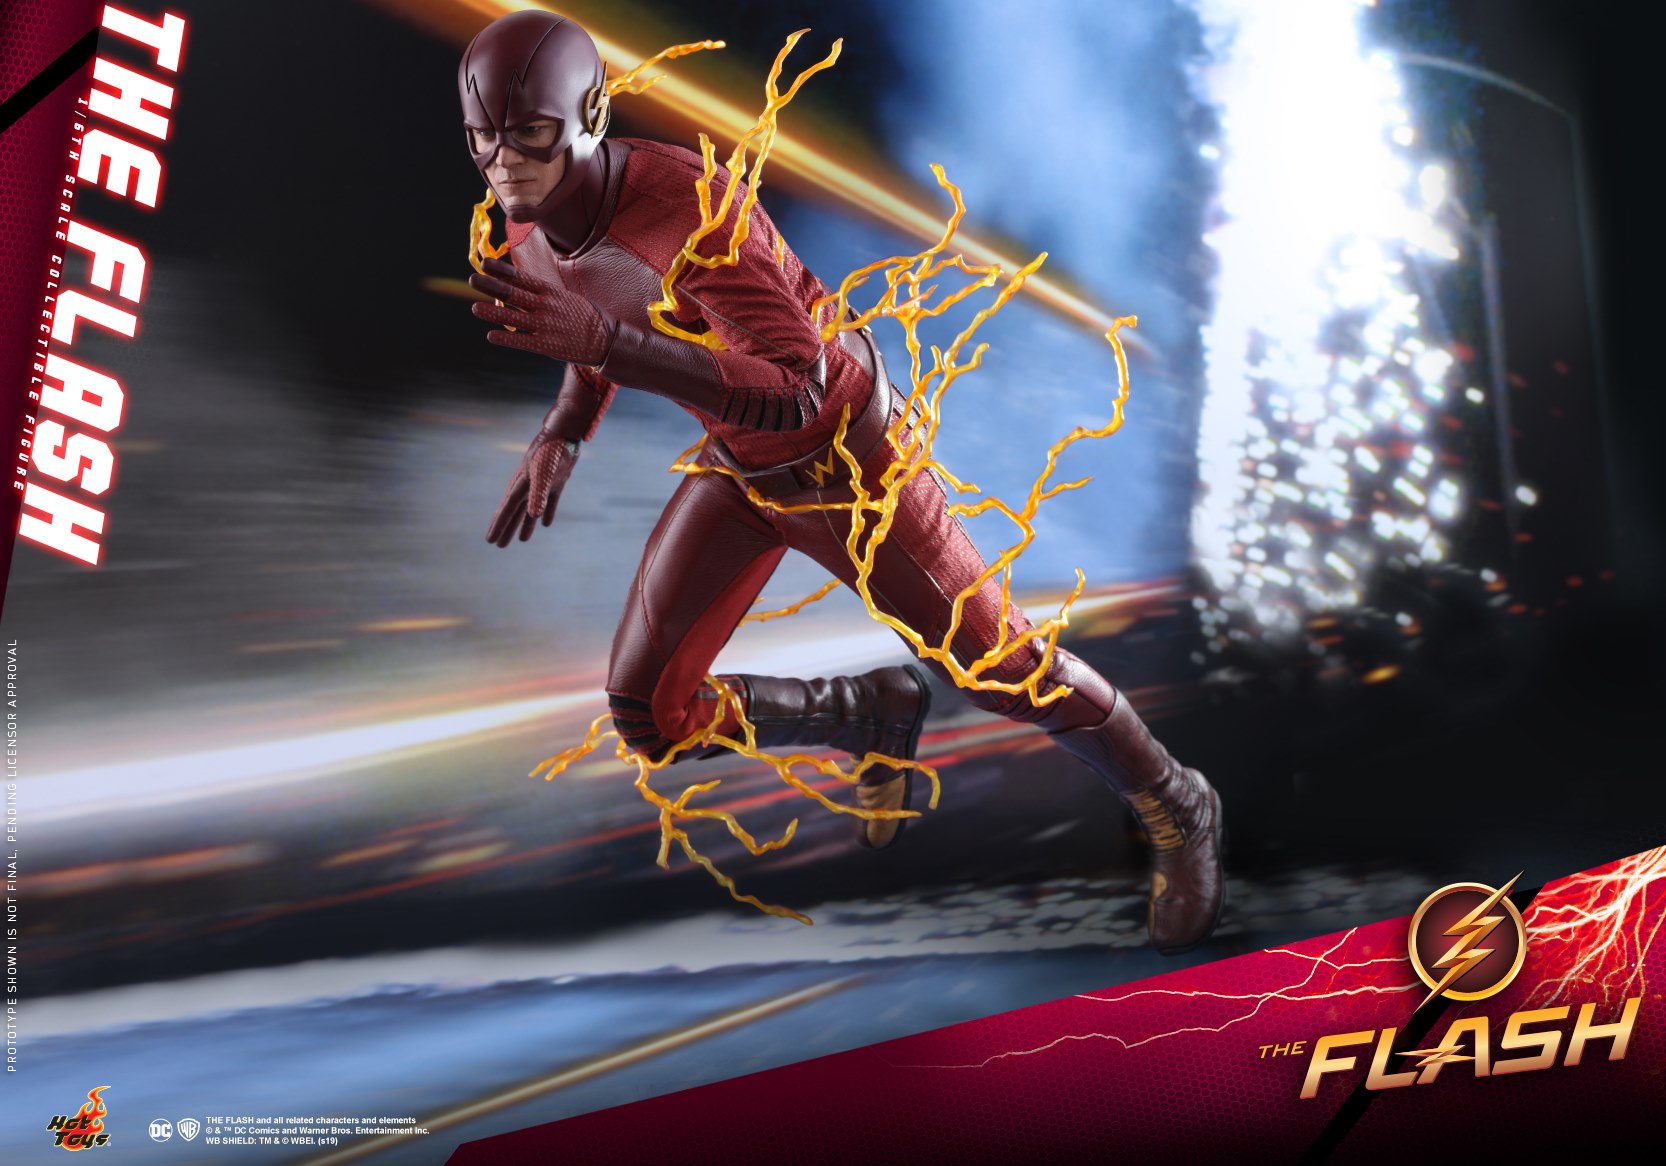 Hot toys The Flash Collectible Figure